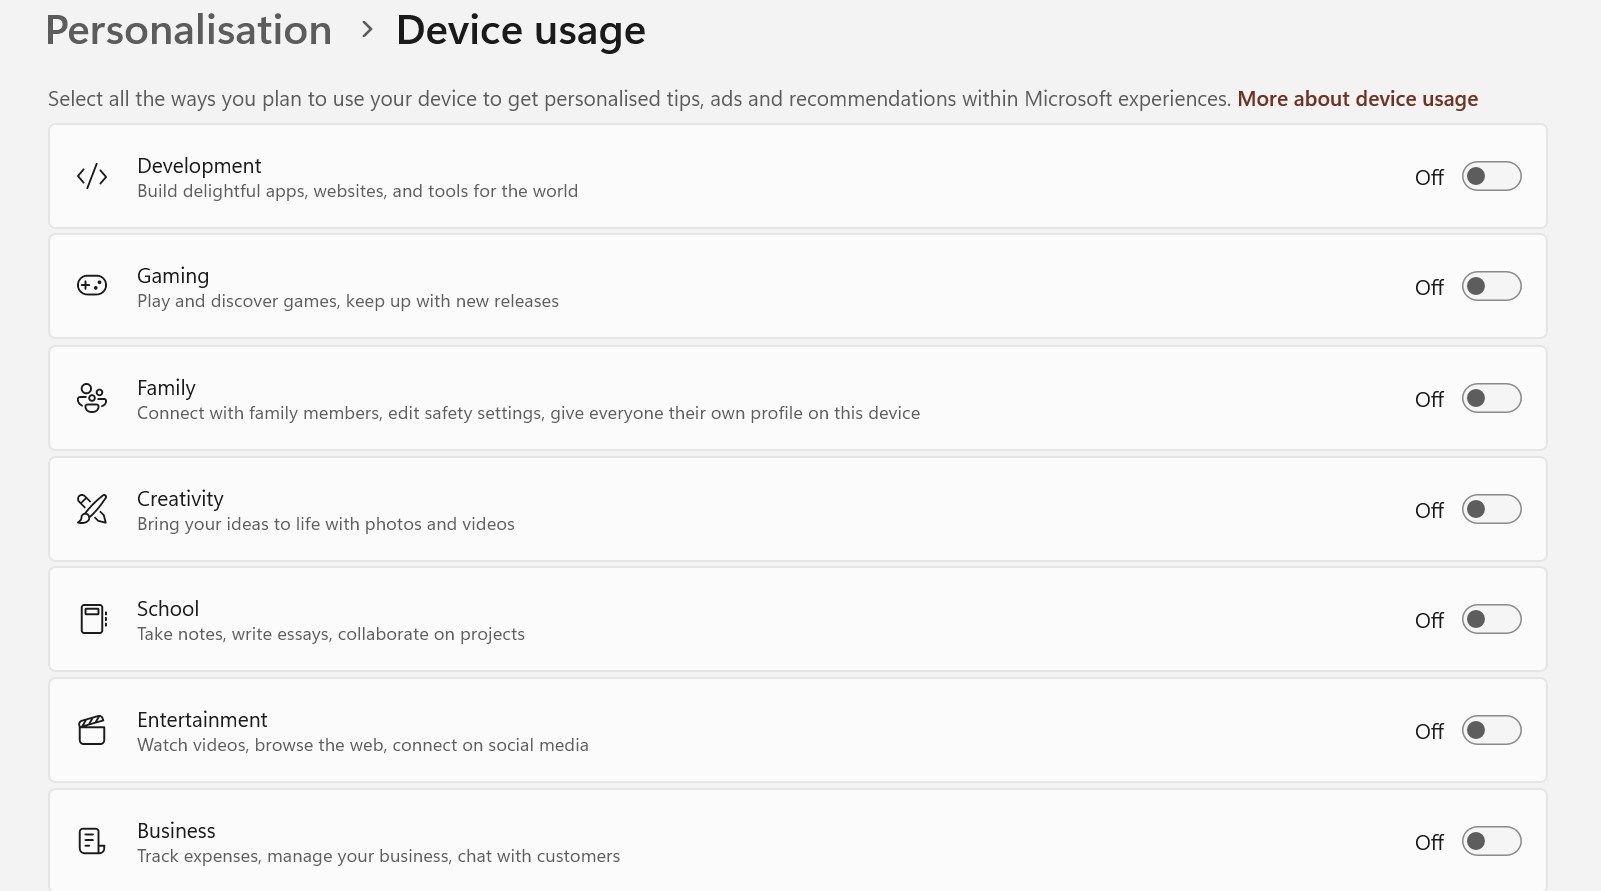 Disabling all device usage permissions in the Windows Settings app.